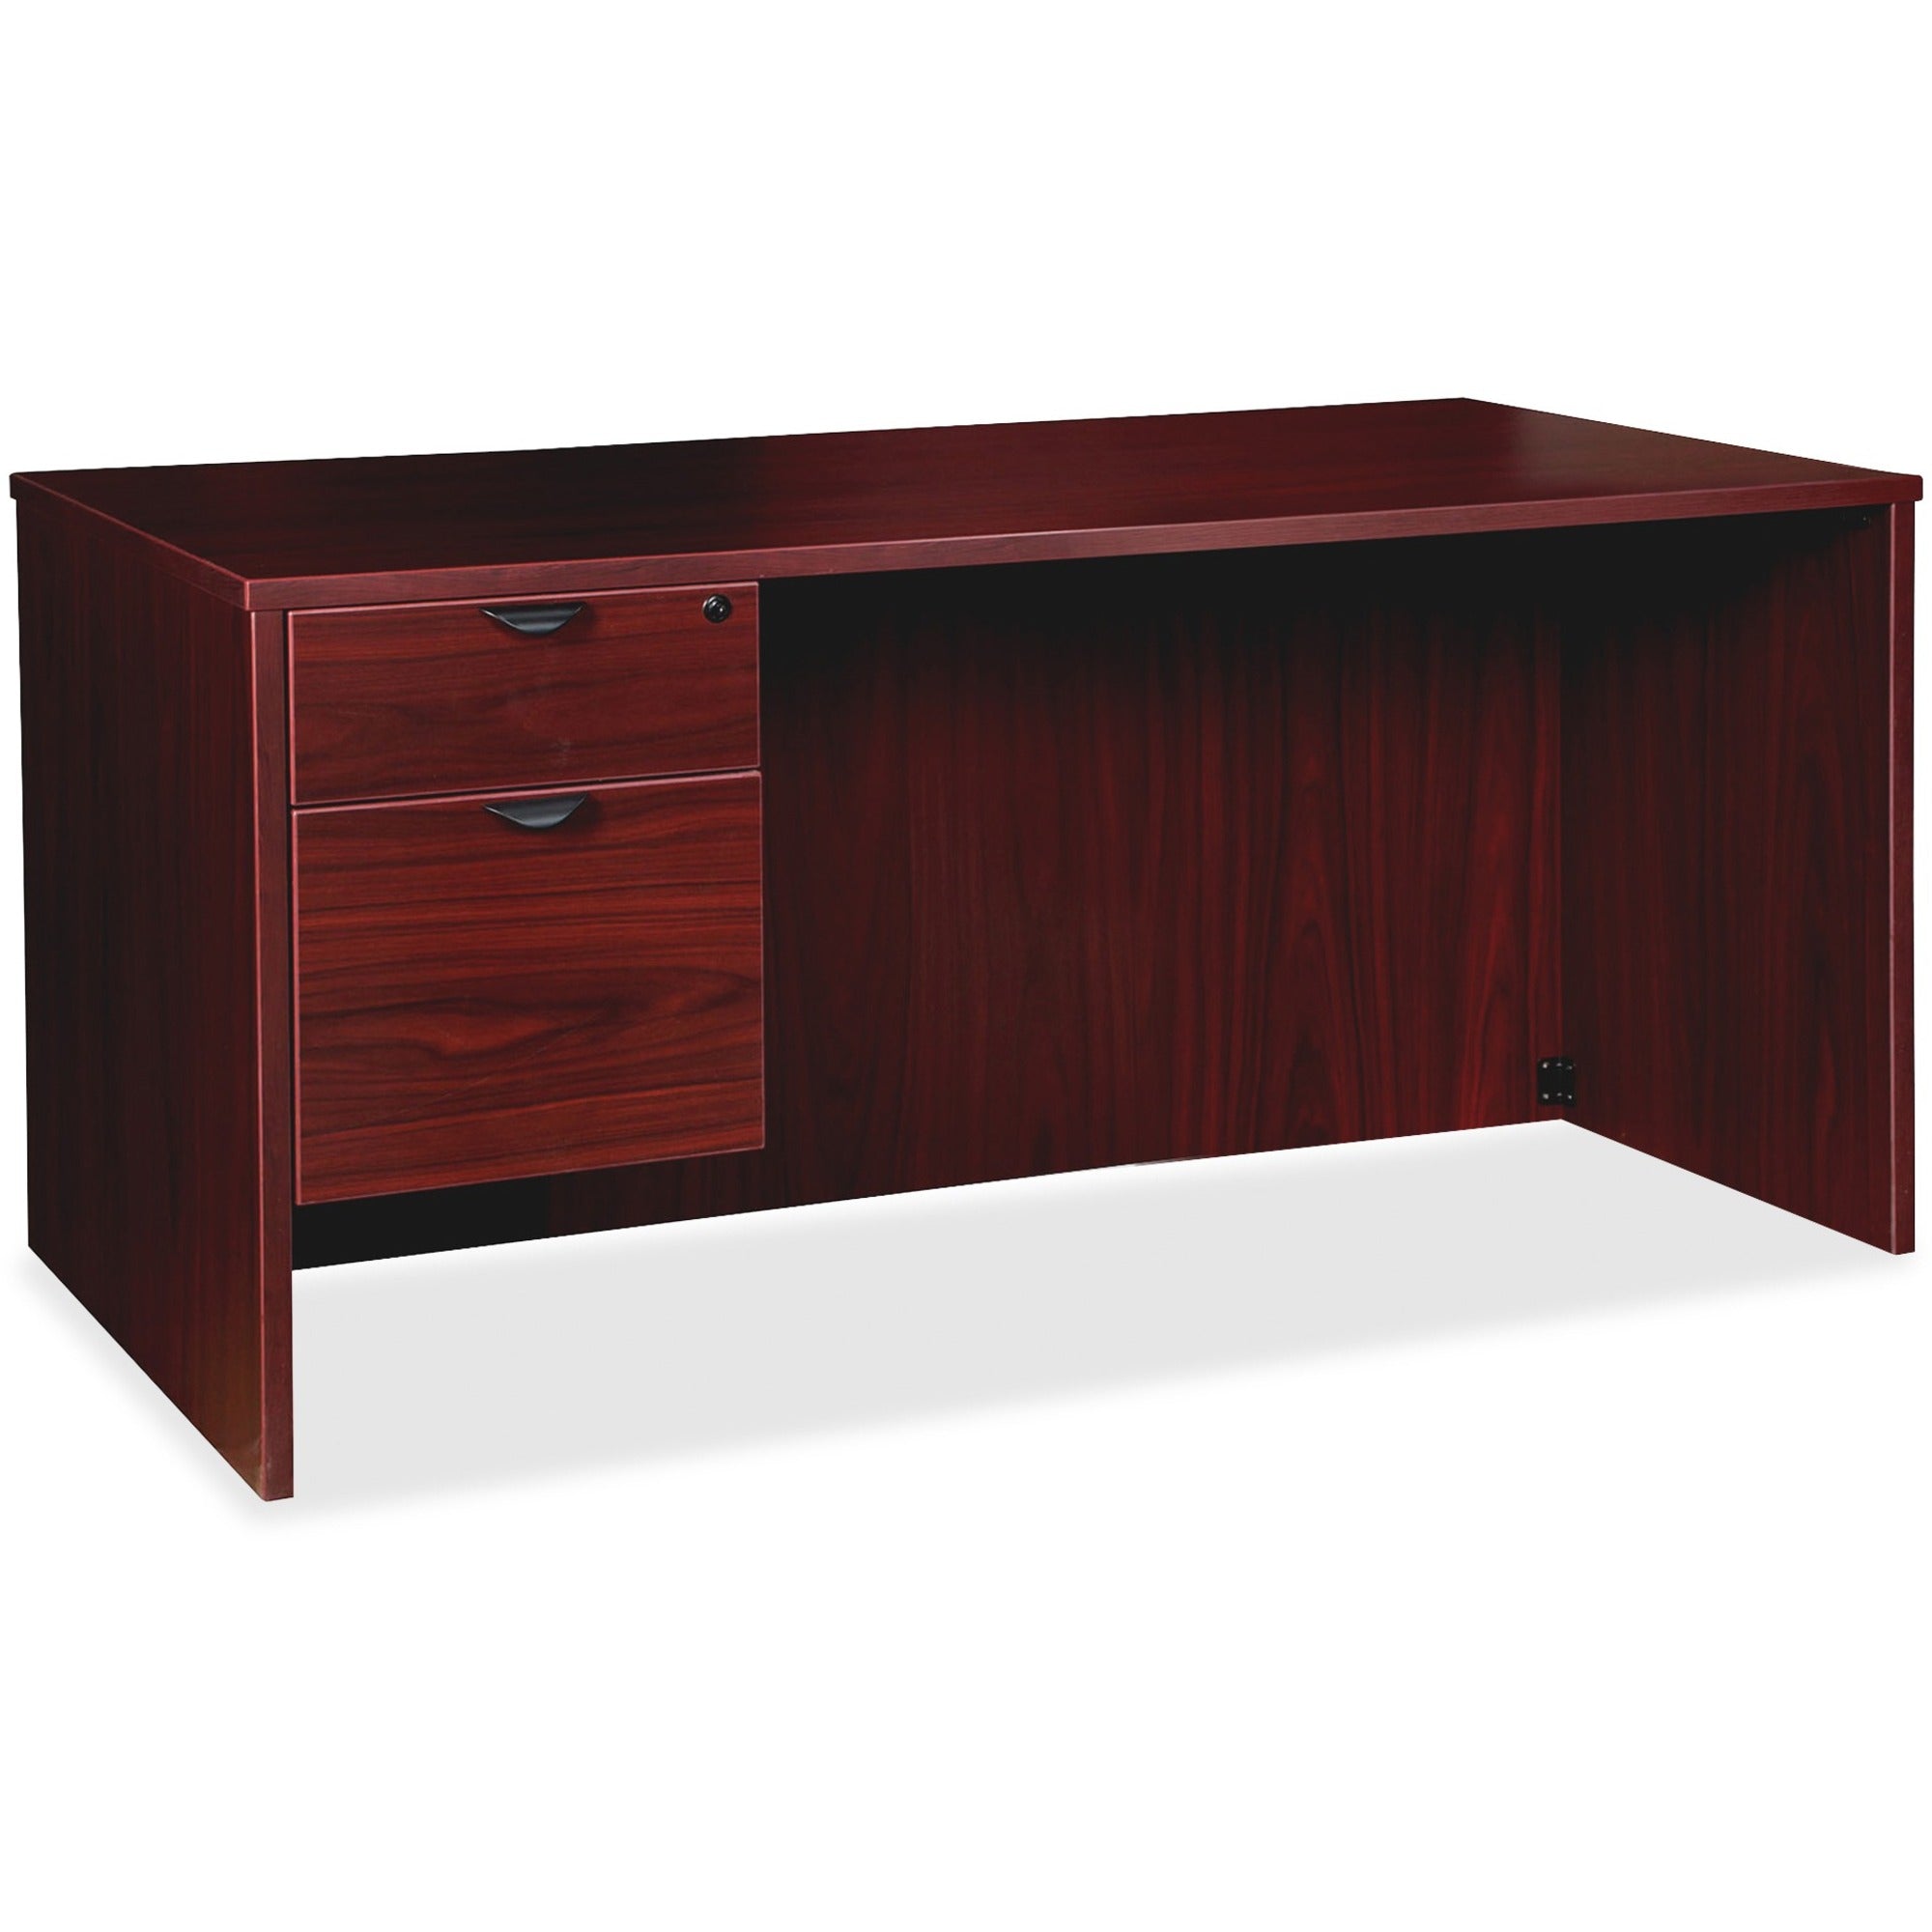 lorell-prominence-20-3-4-left-pedestal-desk-1-top-66-x-3029-2-x-file-box-drawers-single-pedestal-on-left-side-band-edge-material-particleboard-finish-mahogany-laminate-thermofused-melamine-tfm_llrpd3066qlmy - 1